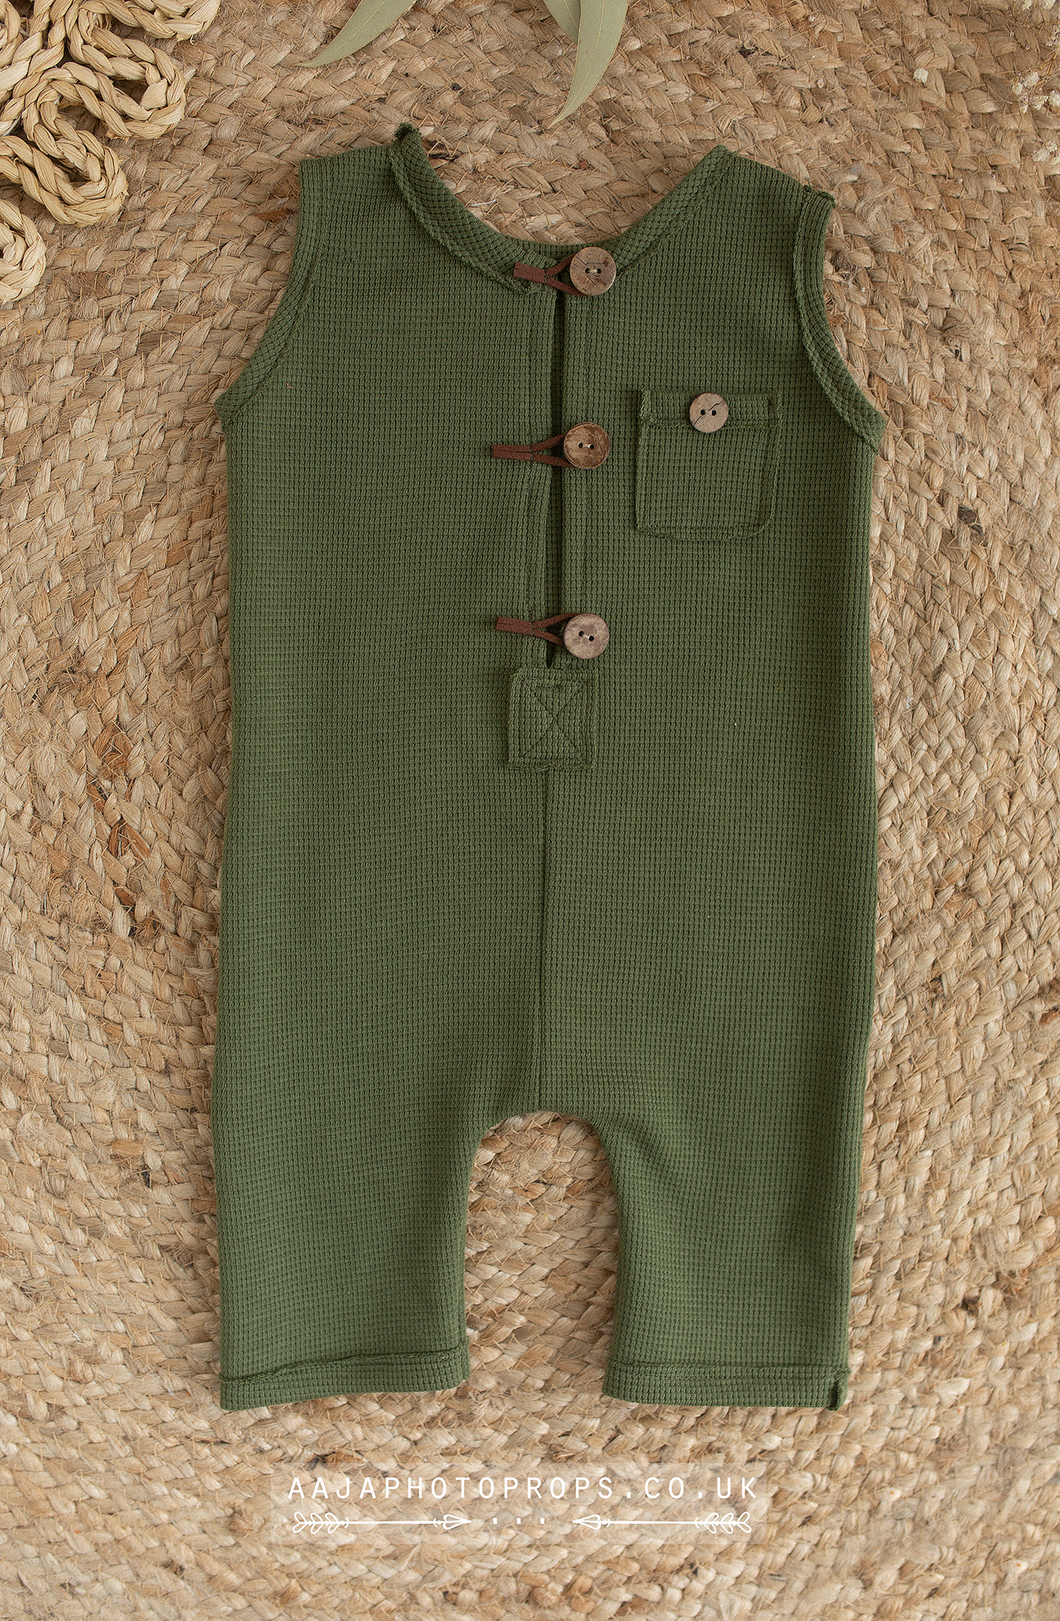 9-12 months size baby romper, green, made to order